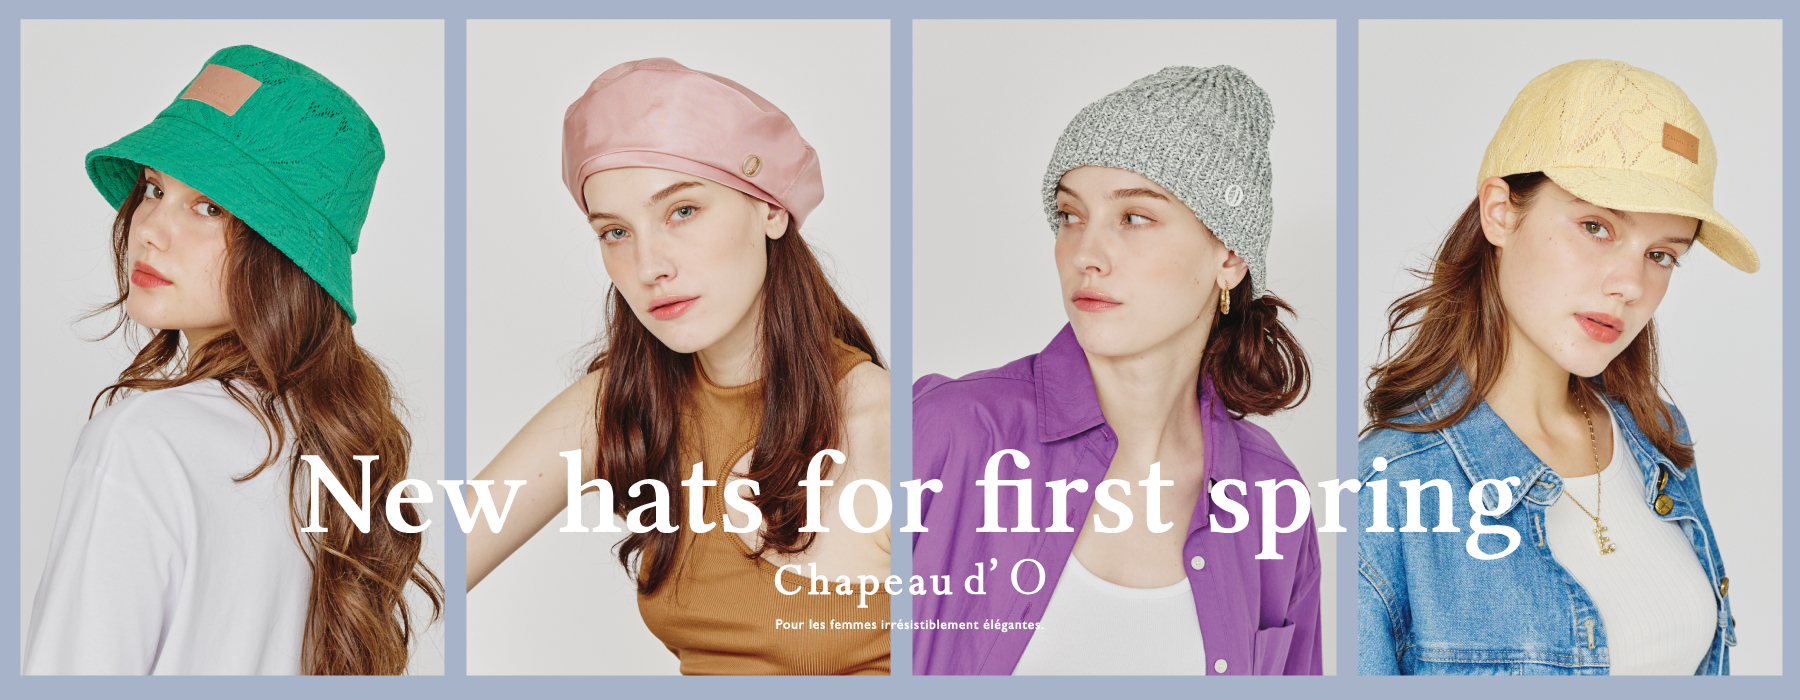 New hats for first spring/Chapeau d' O